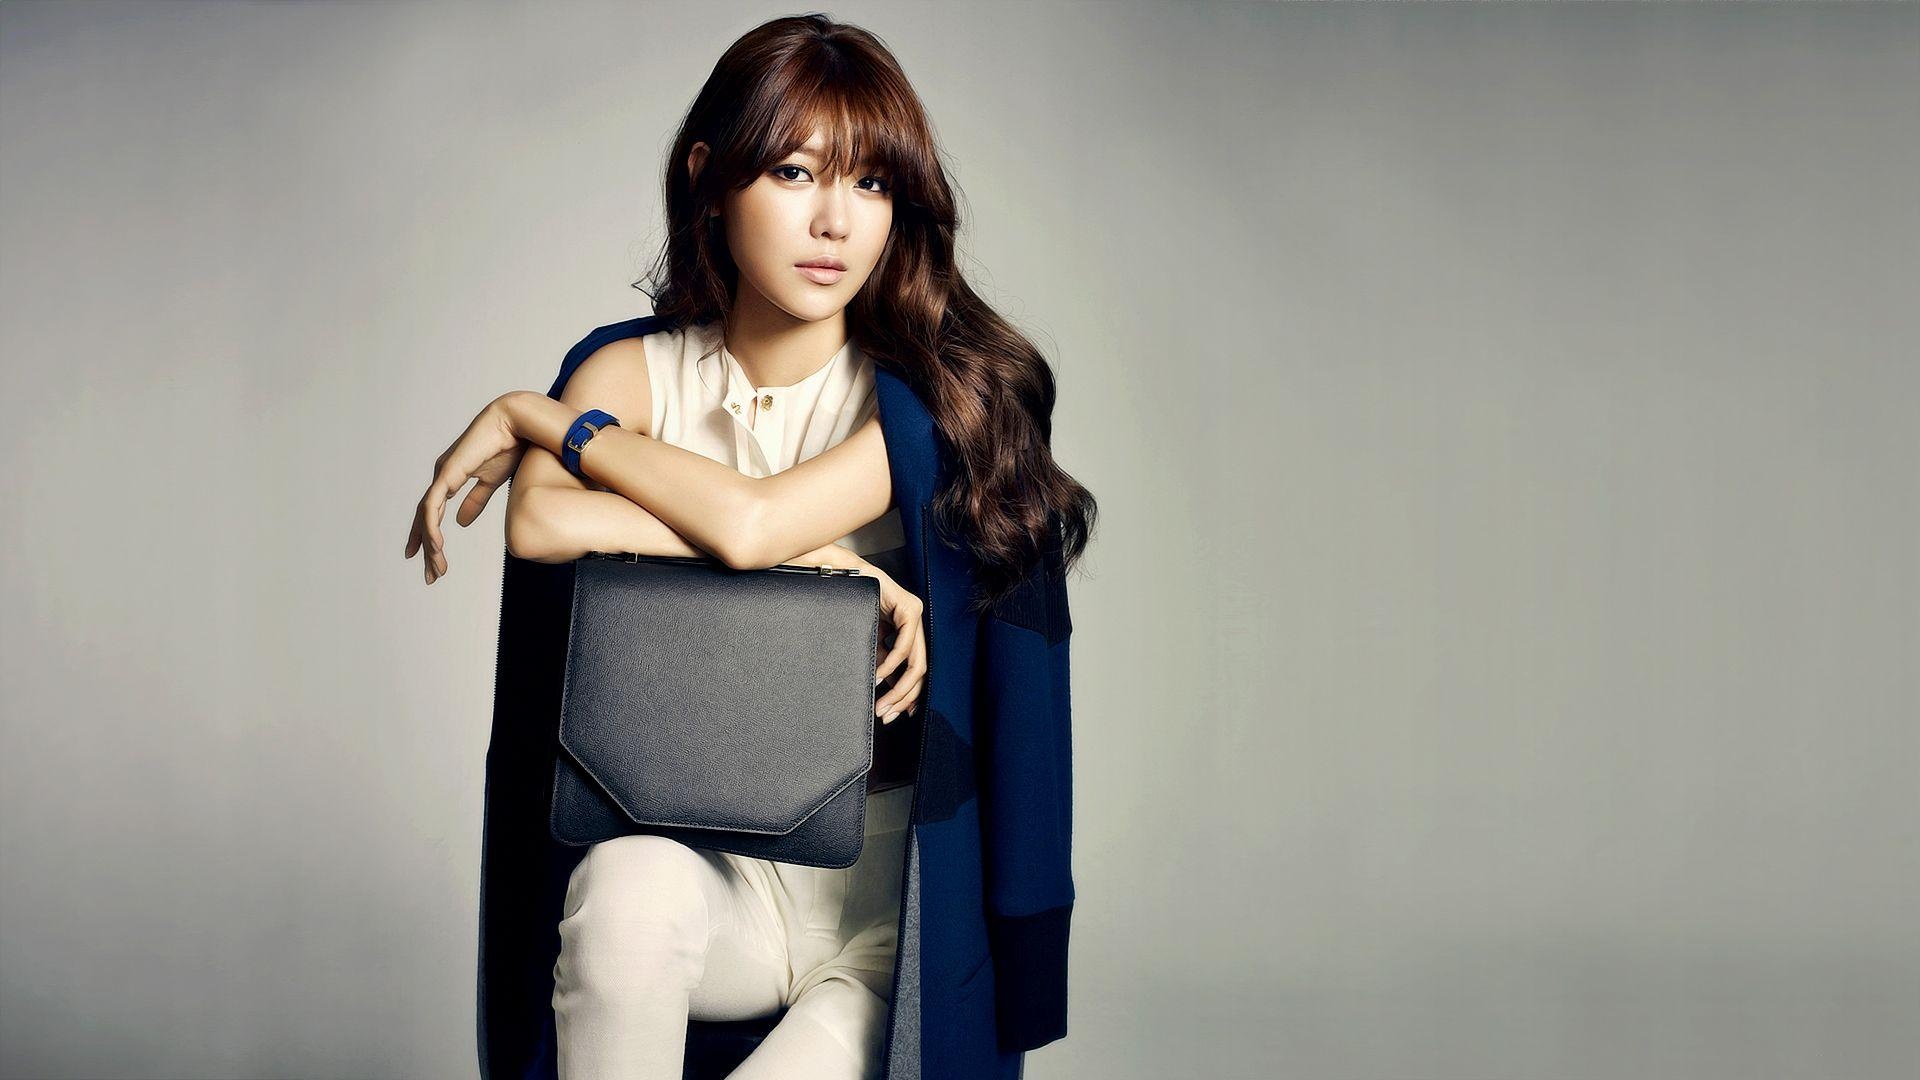 Choi Soo Young, Music artist, Sooyoung wallpapers, 1920x1080 Full HD Desktop